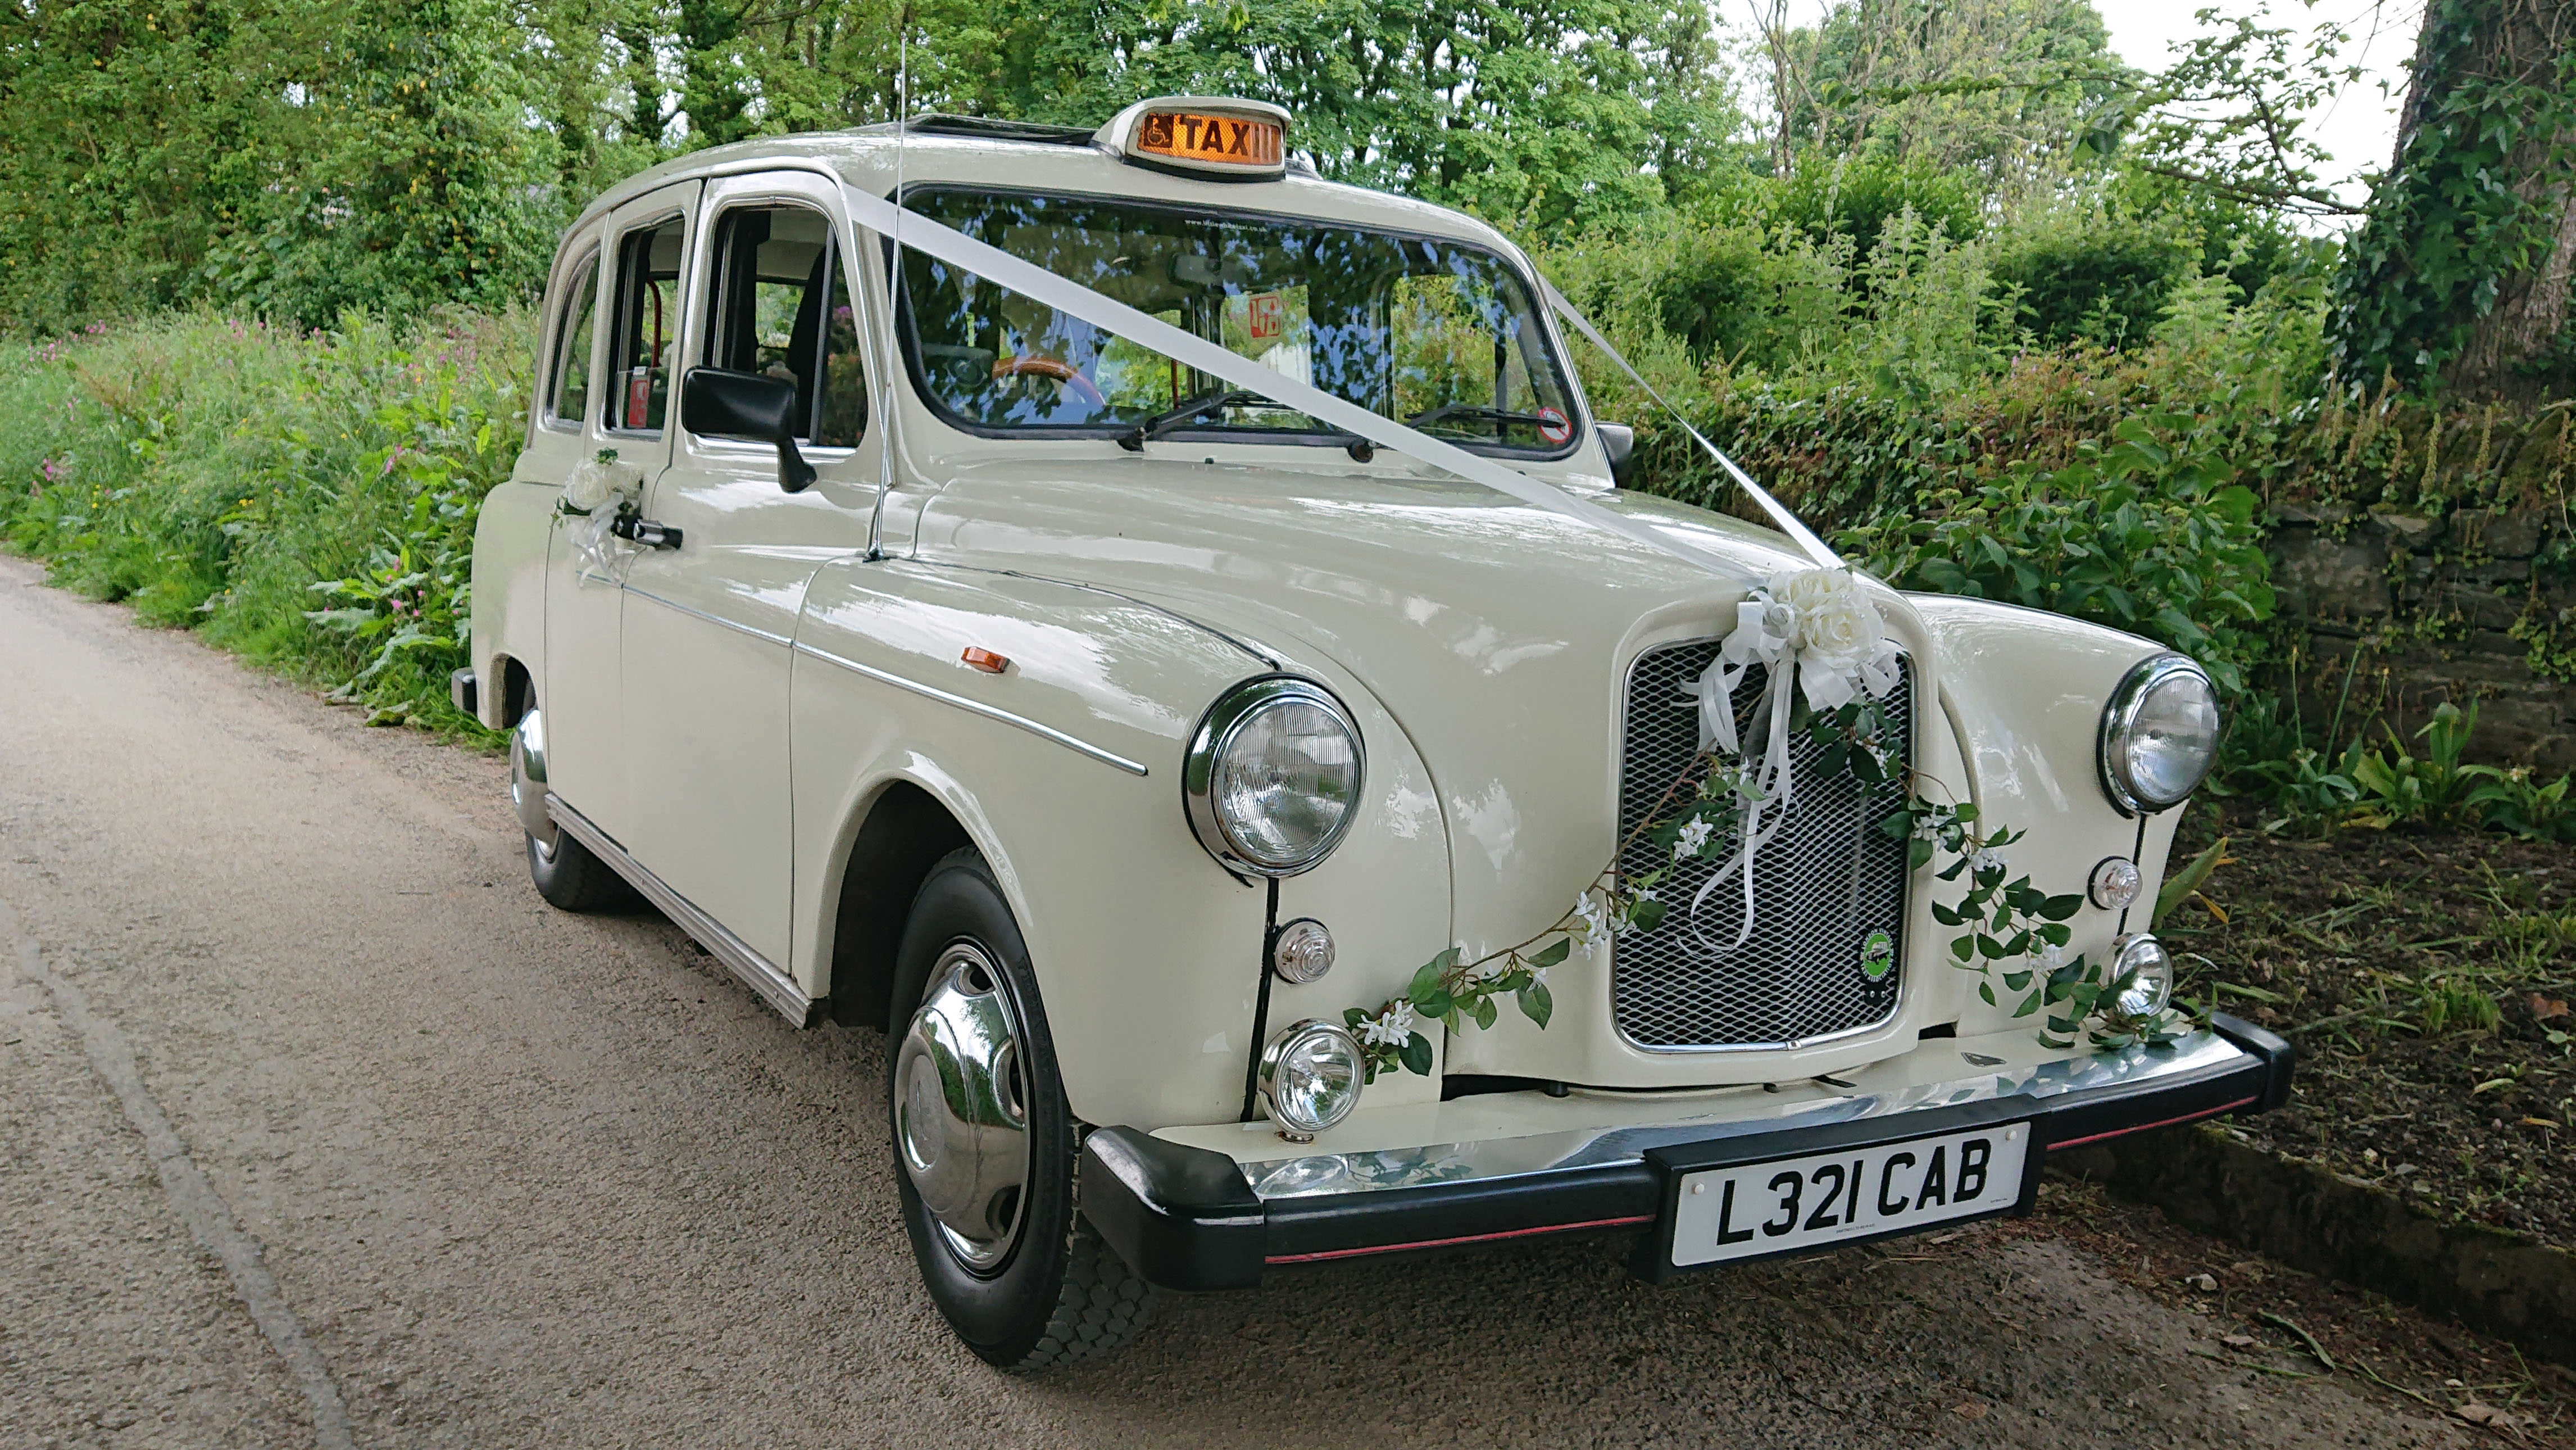 Traditional London Taxi Cab